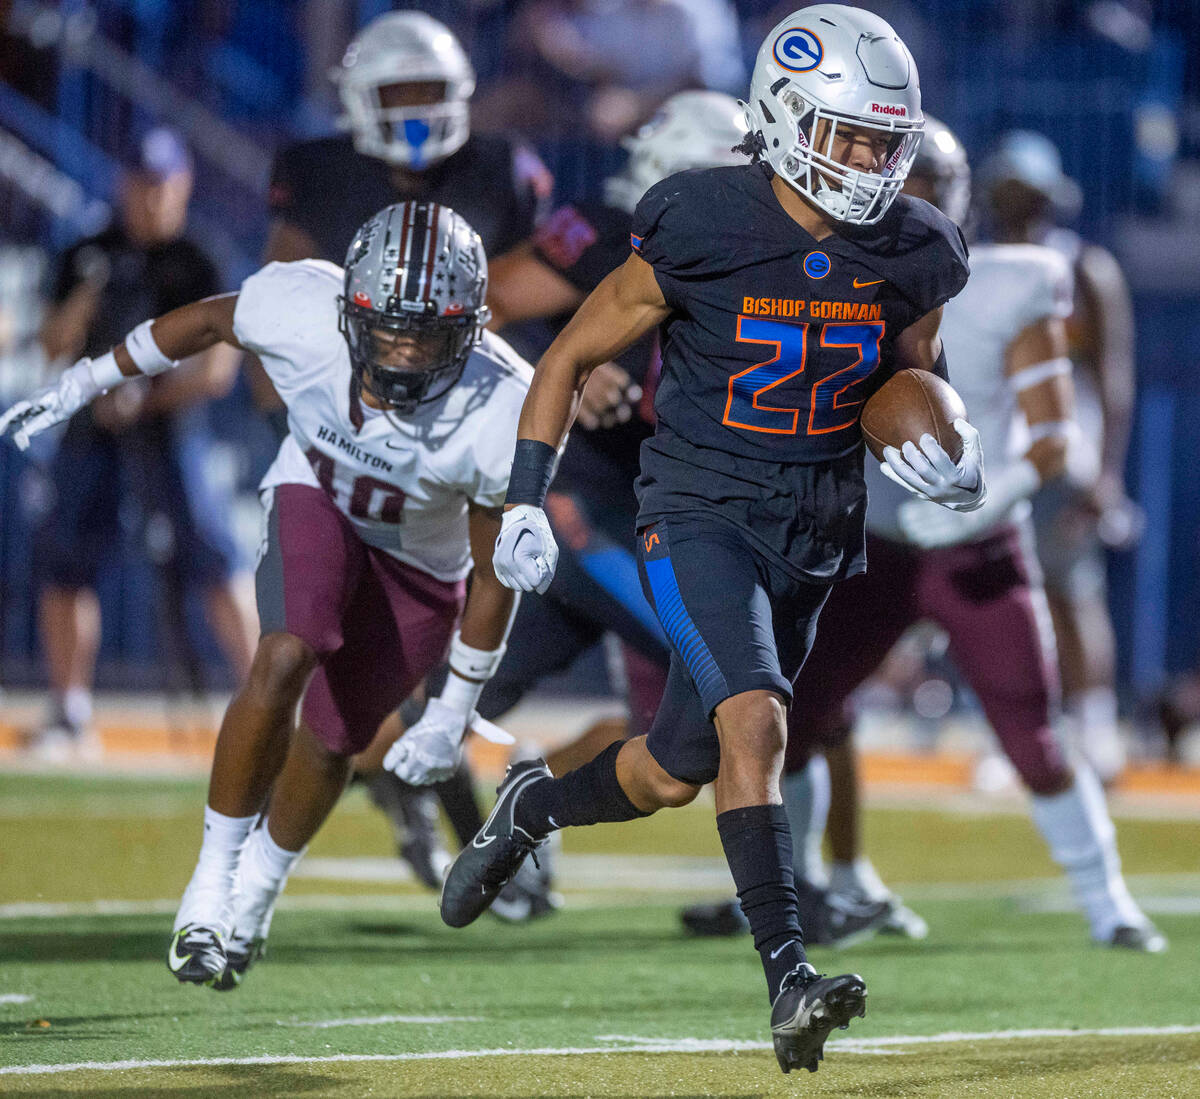 Bishop Gorman running back Micah Kaapana (22) sprints into the end zone for a score past Hamilt ...